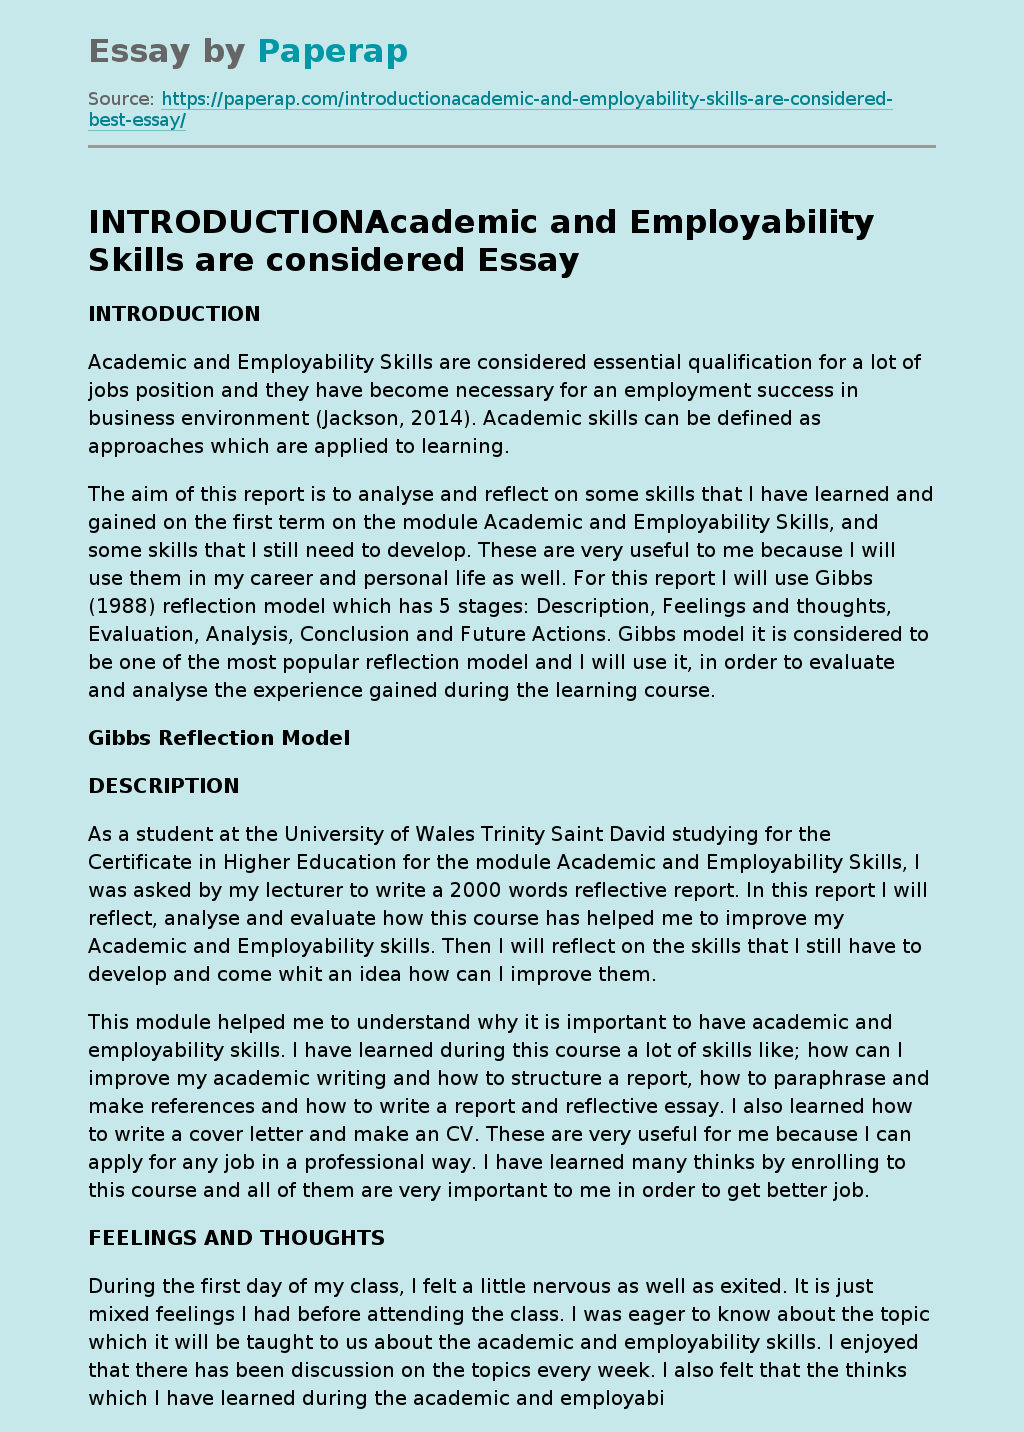 INTRODUCTIONAcademic and Employability Skills are considered